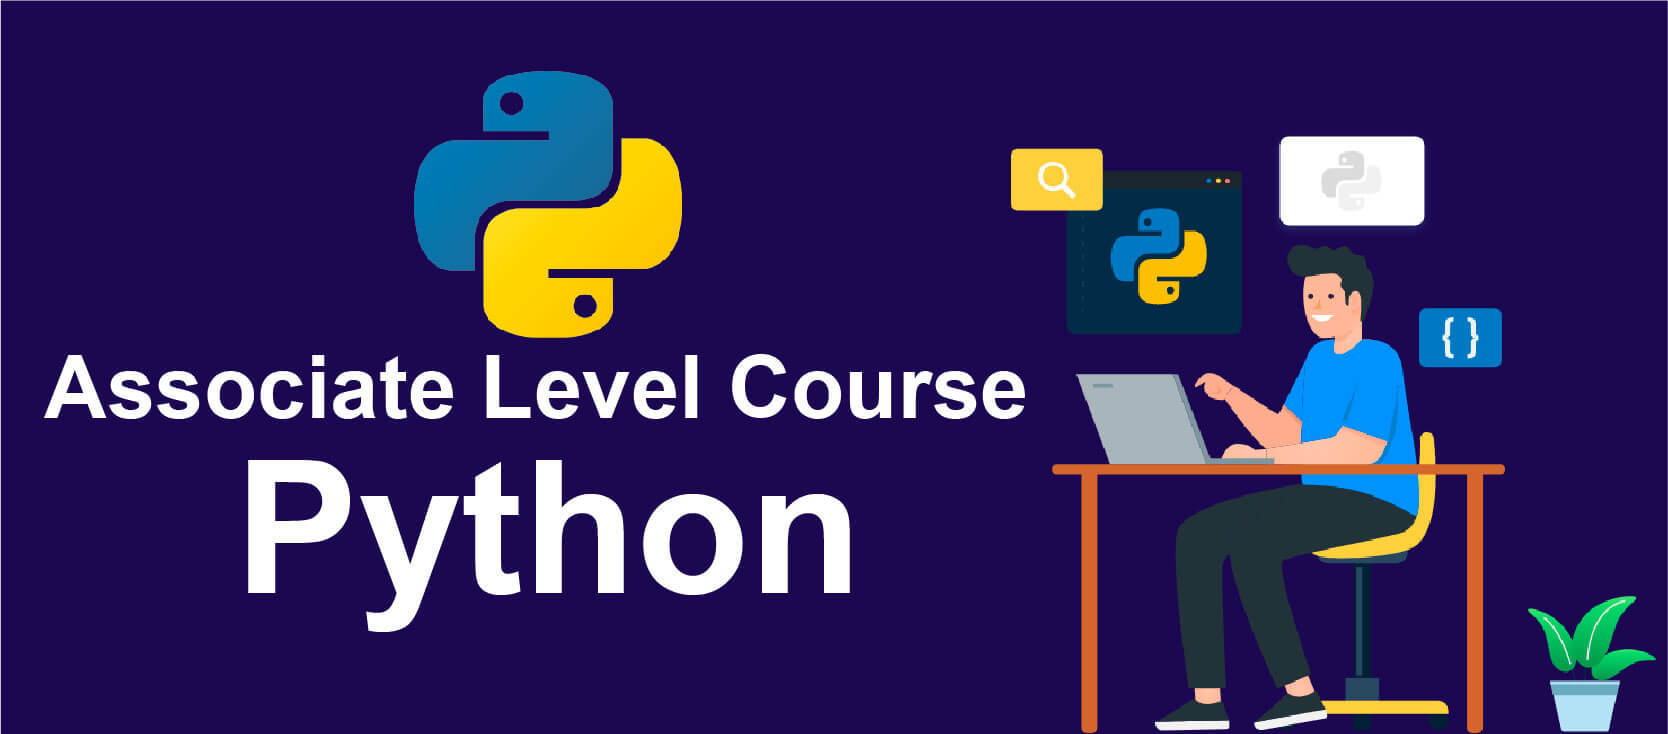 Associate Level Course in Python